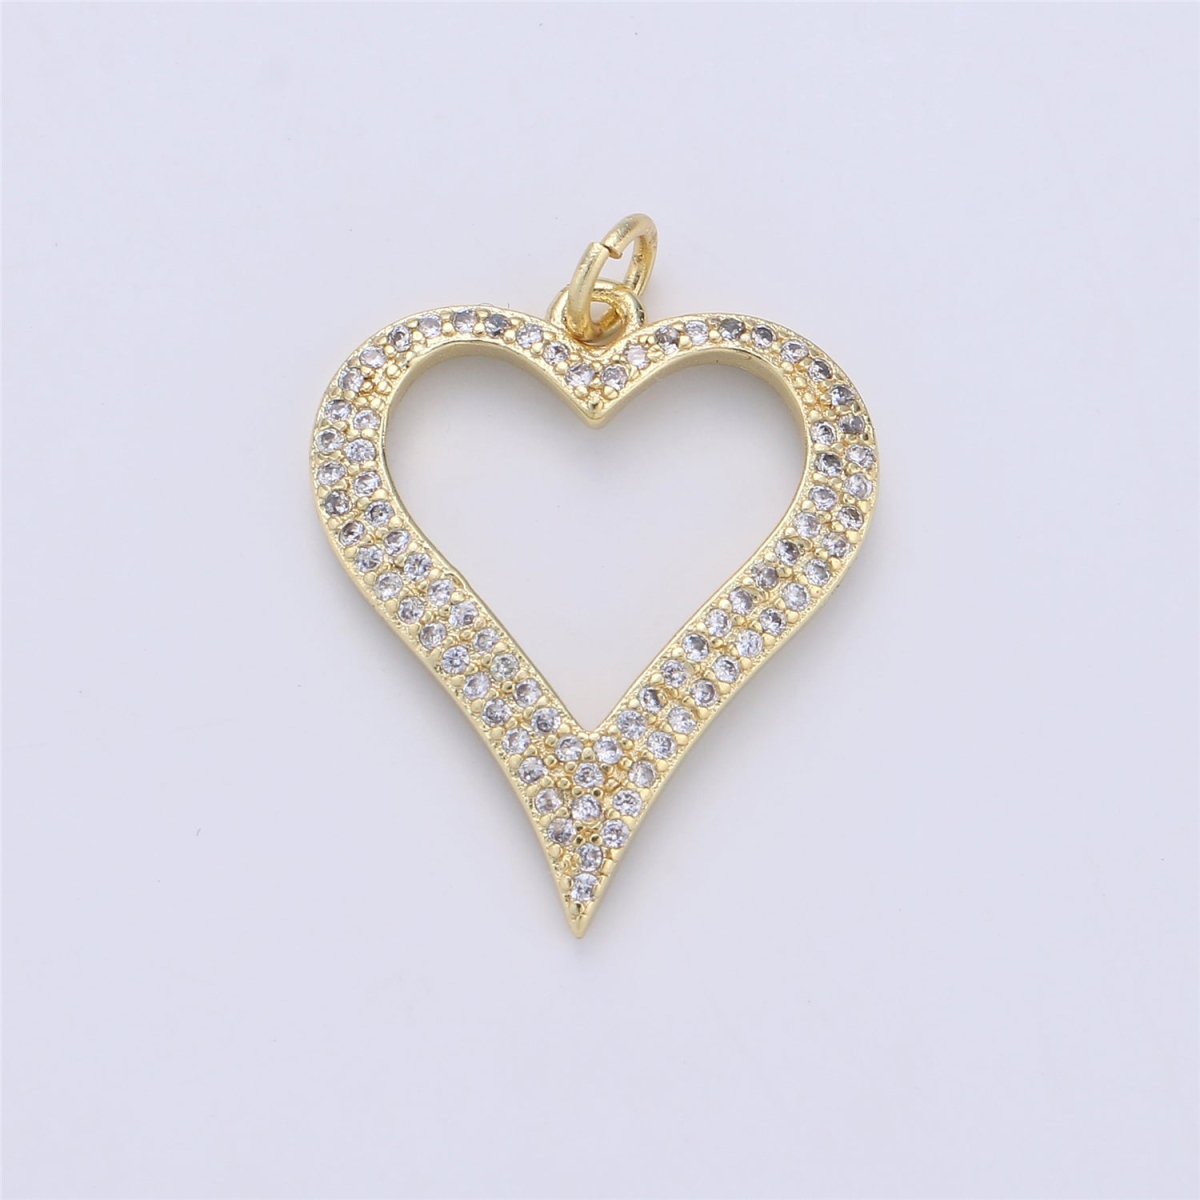 14k Gold Filled Hollow Heart Charm for Necklace Earring Pendant Jewelry Supply C-797 - DLUXCA